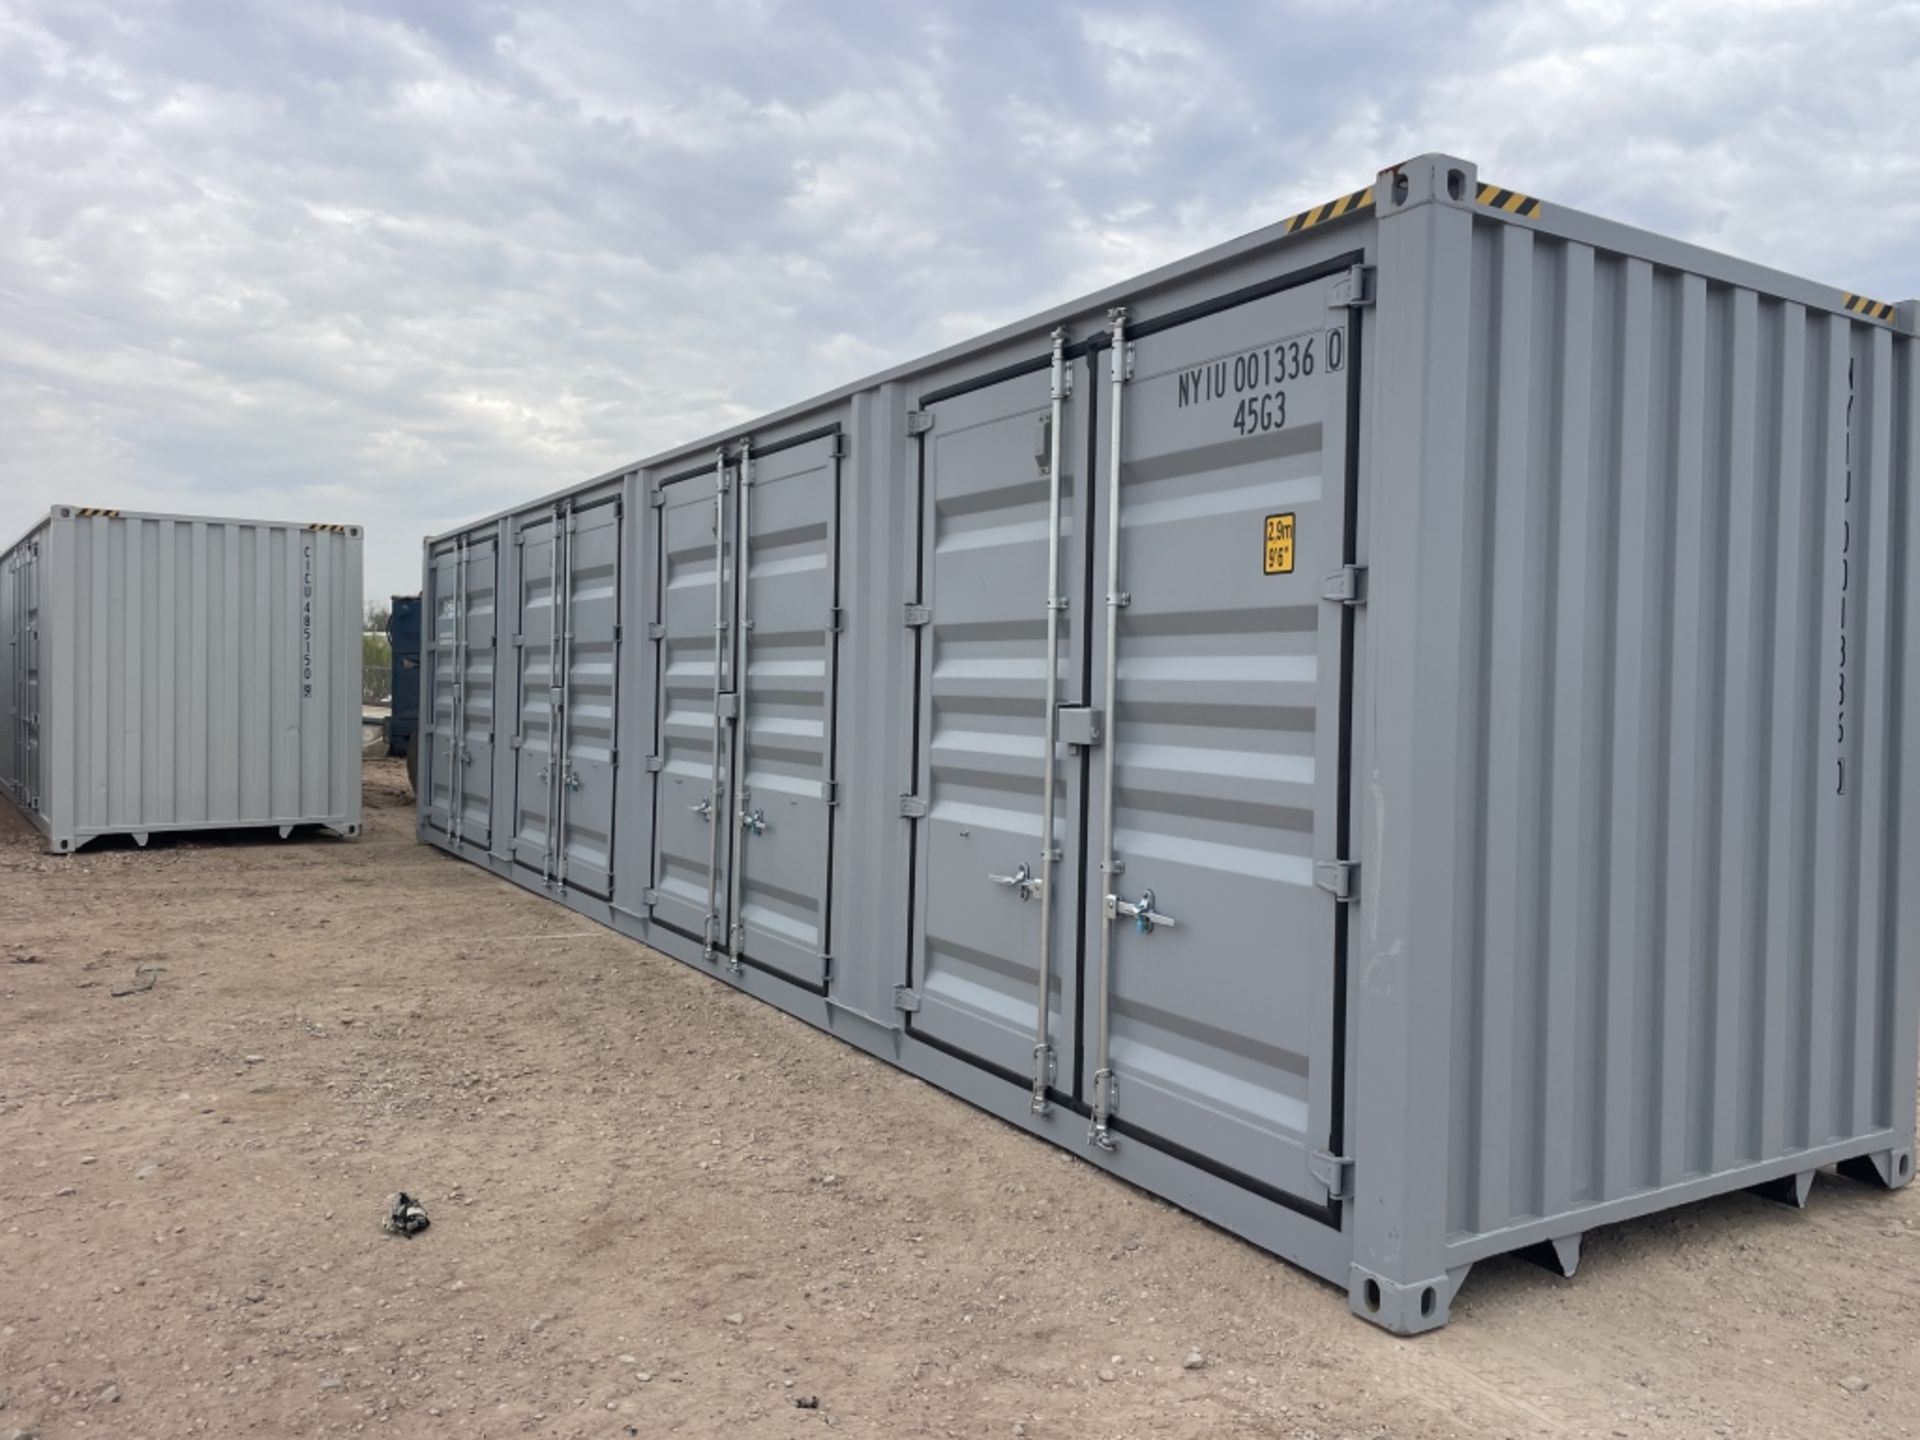 40' HQ One Trip Multi Door Container NYIU0013360 - Image 2 of 10